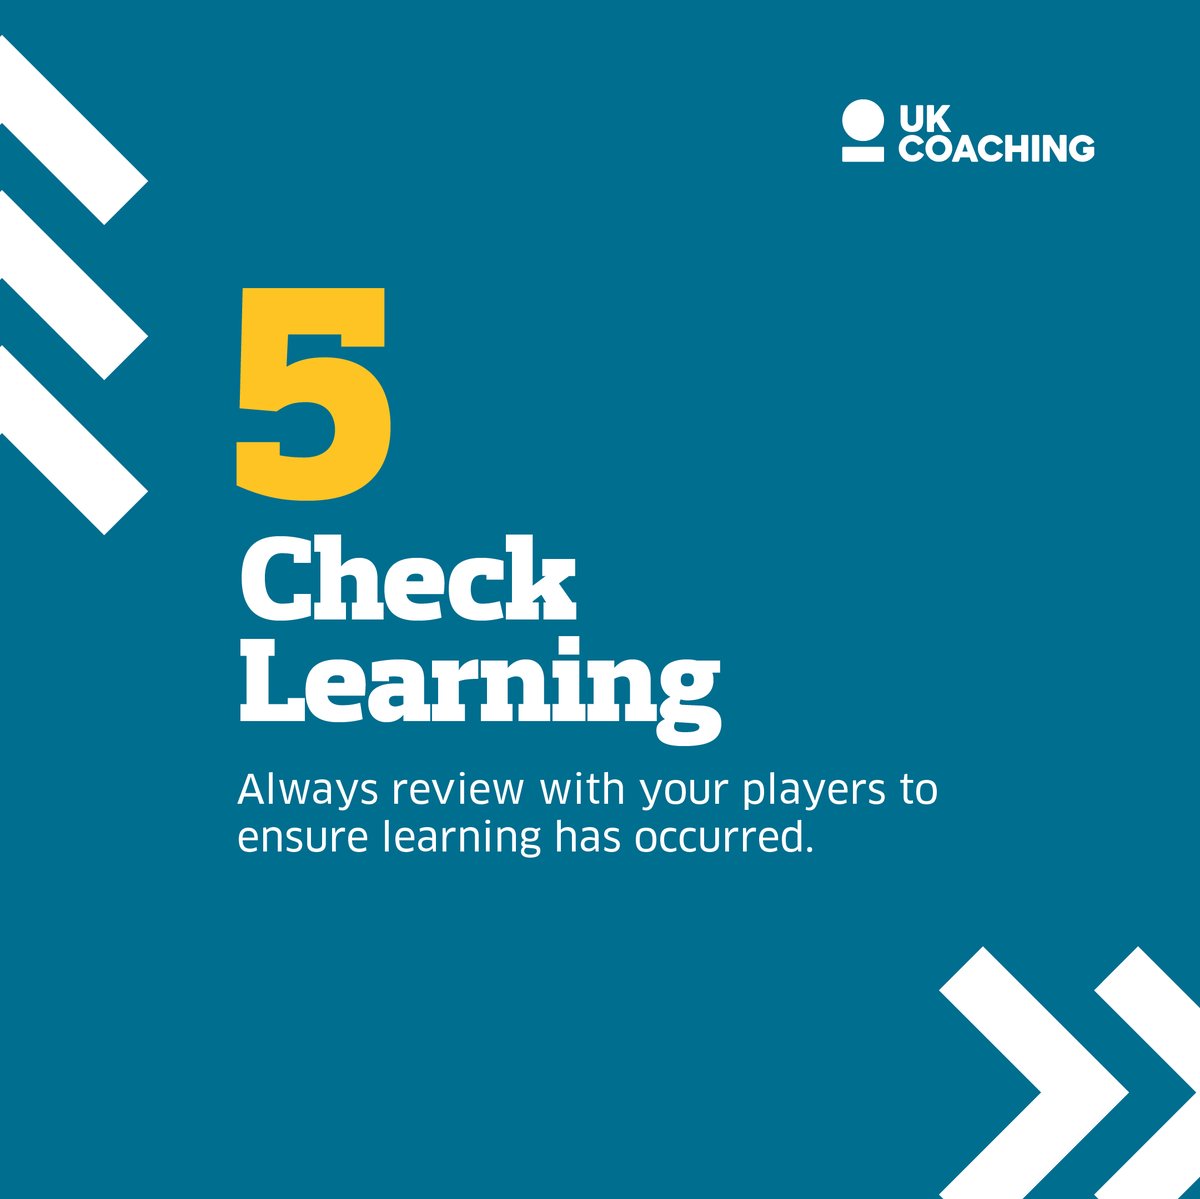 5️⃣ 'Check Learning' – Are your players learning? Ensuring they’re learning is fundamental! @horsesheed (6/8)